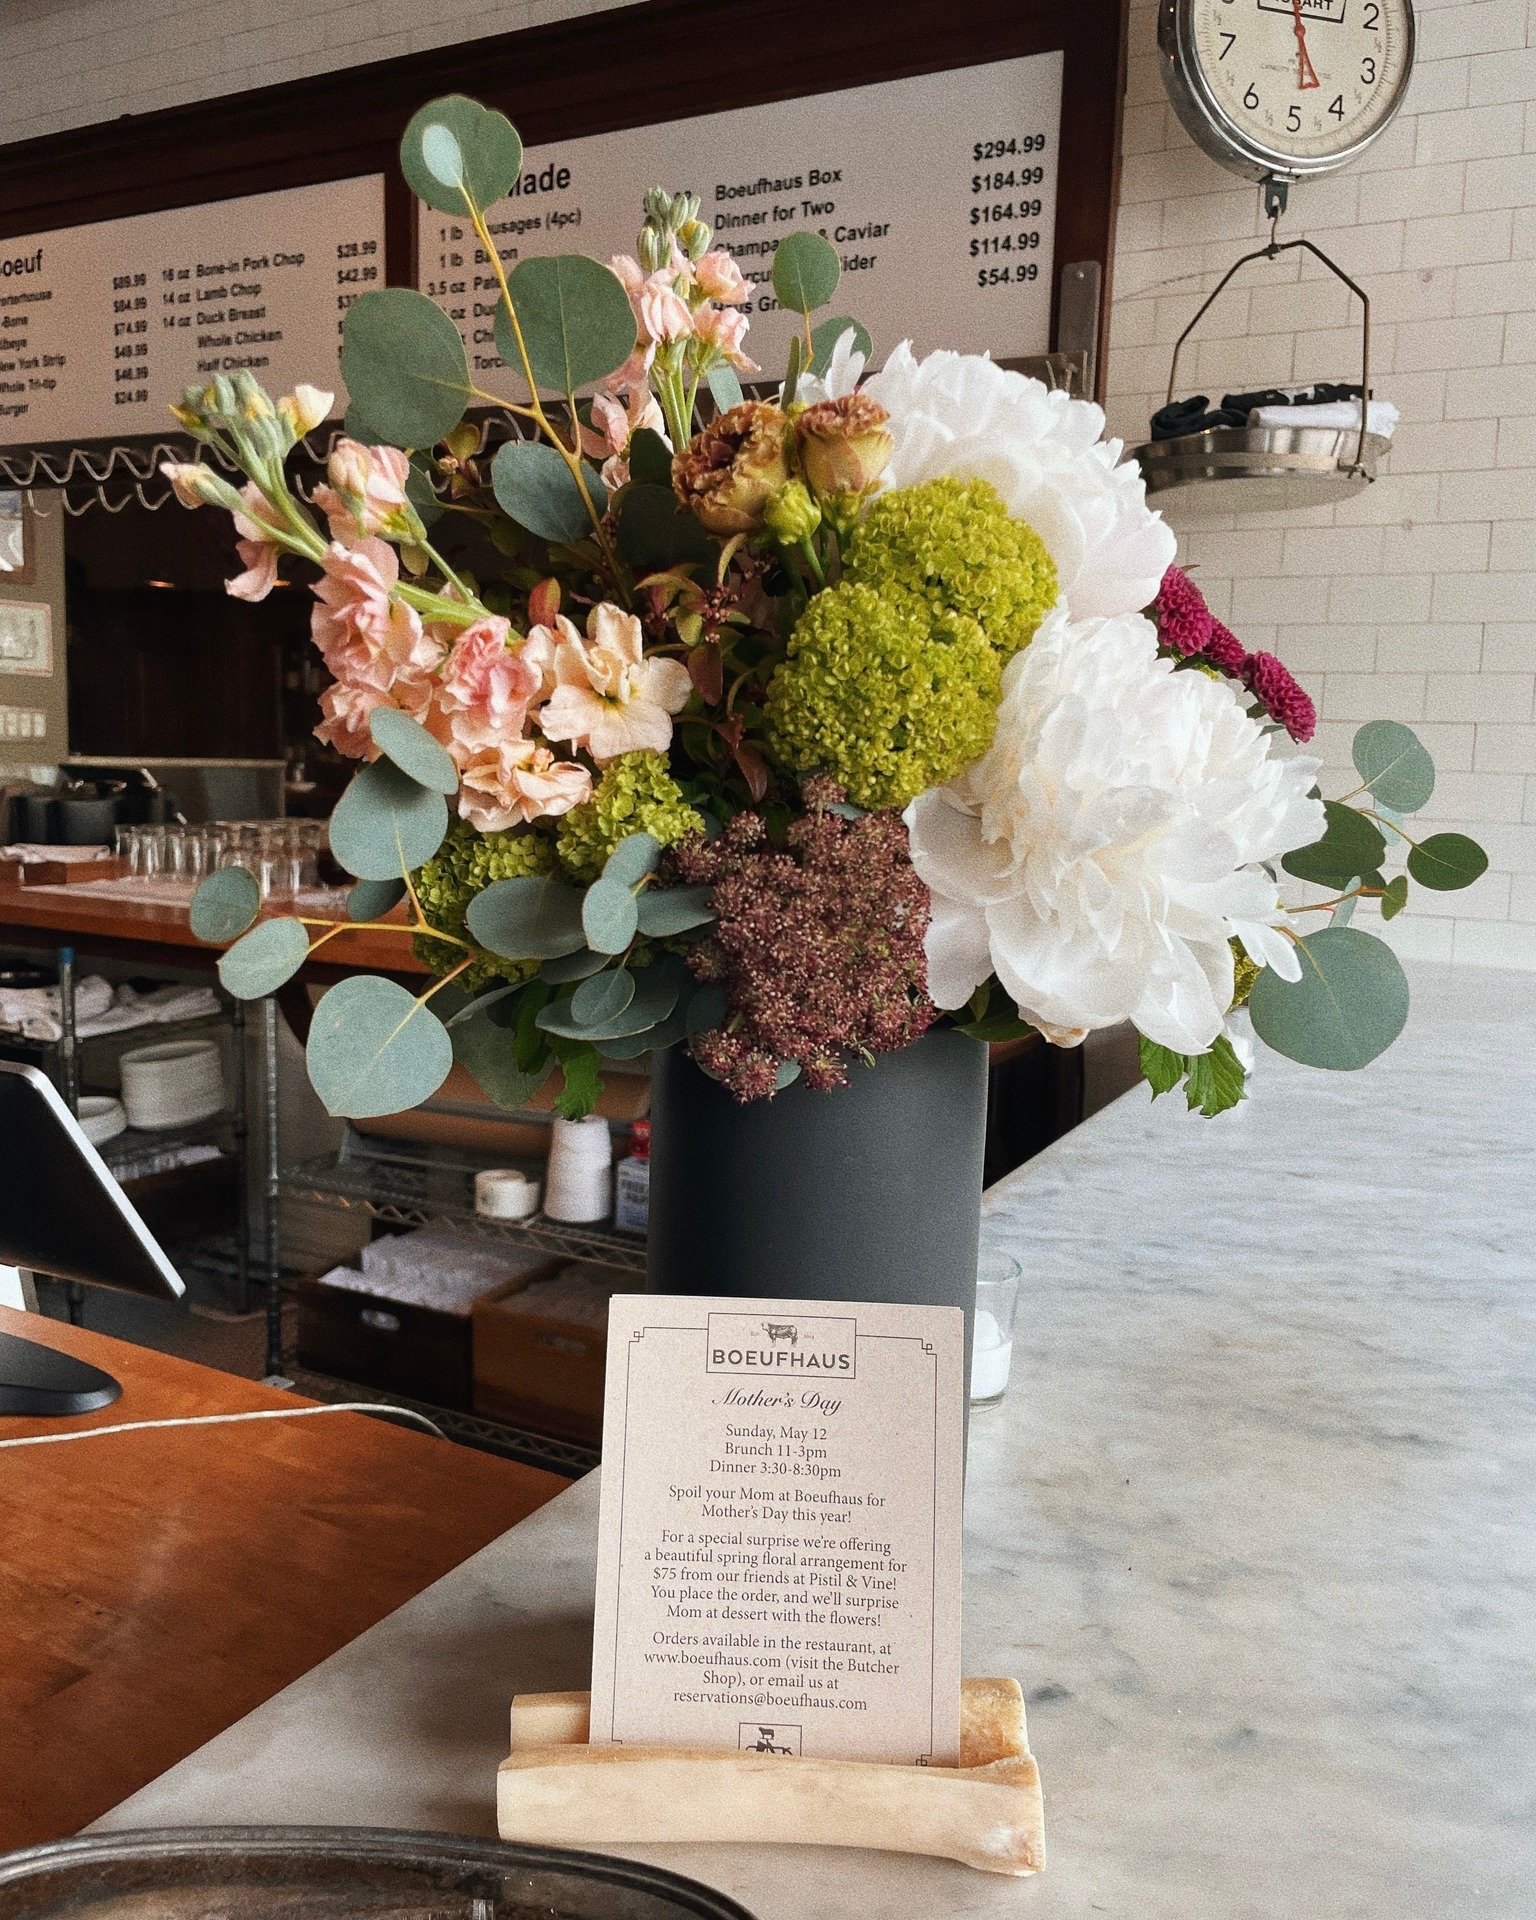 Mother's Day is one week away! Make your brunch or dinner reservation via Resy, then visit the Butcher Shop tab on our website and place an order for a beautiful floral arrangement from our friends at @pistilandvine and we'll surprise Mom at dessert!